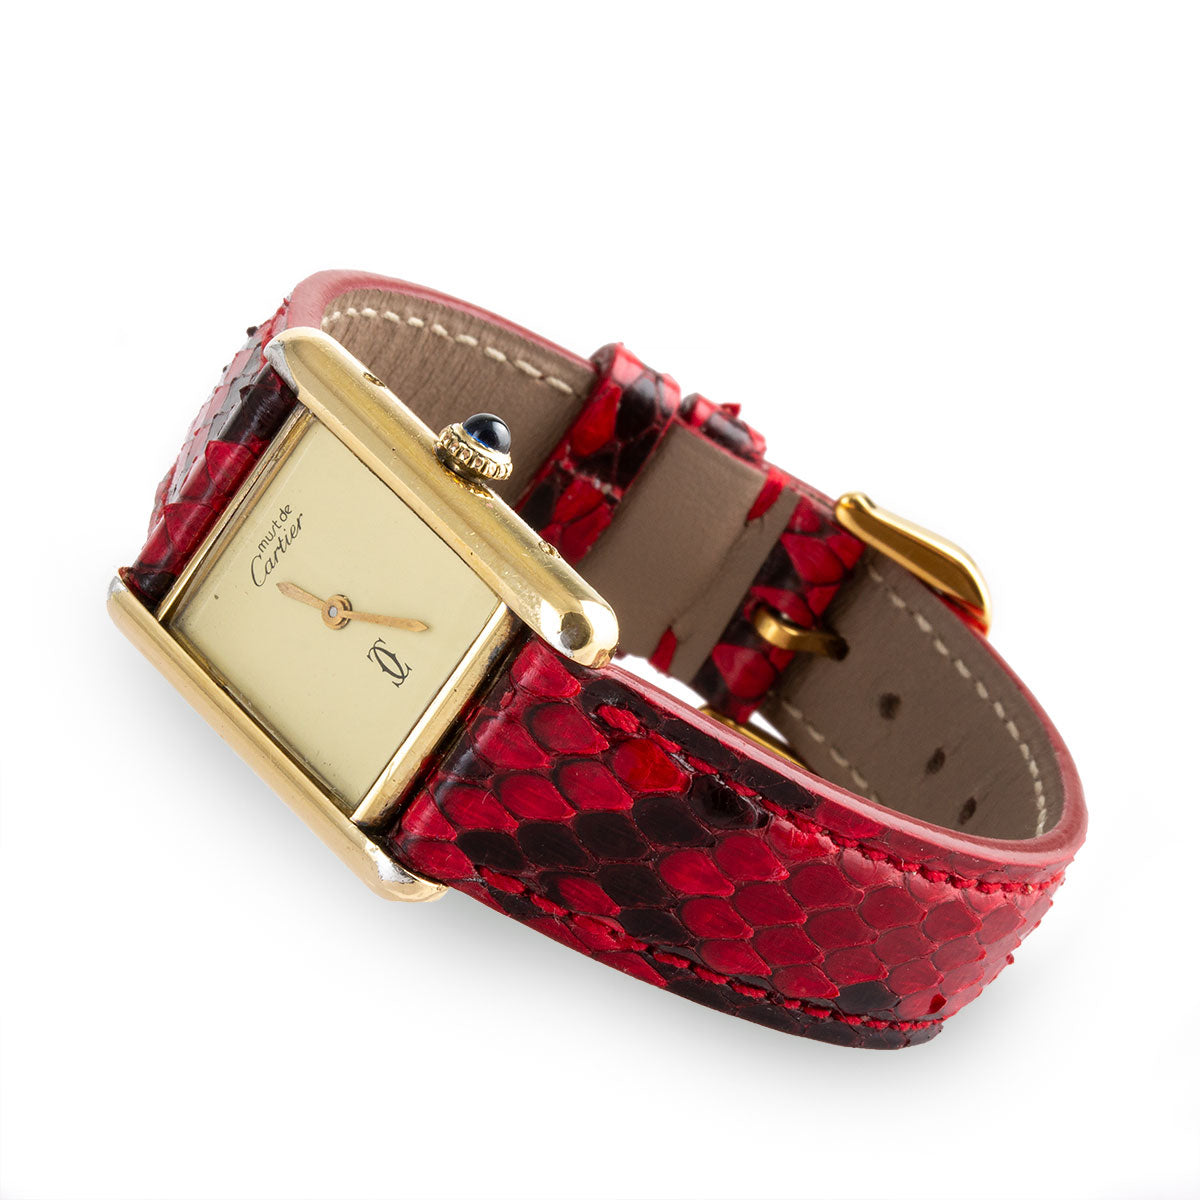 "Valentine" leather watch band - Red and black python